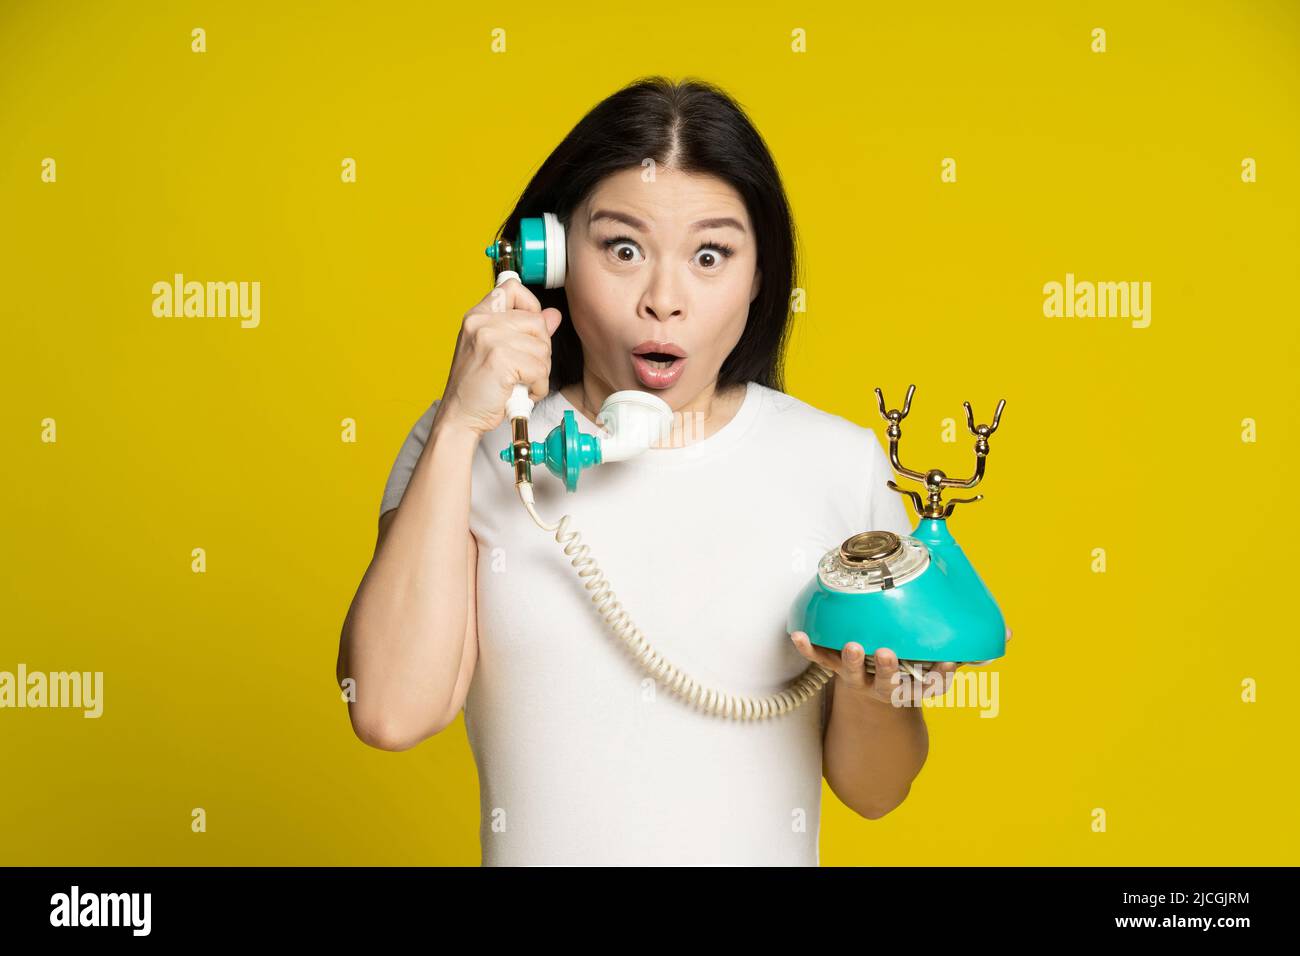 Asian woman talking using vintage, retro telephone in hands shock, excited, surprise face expression wearing white t-shirt isolated on yellow background. Communication concept.  Stock Photo